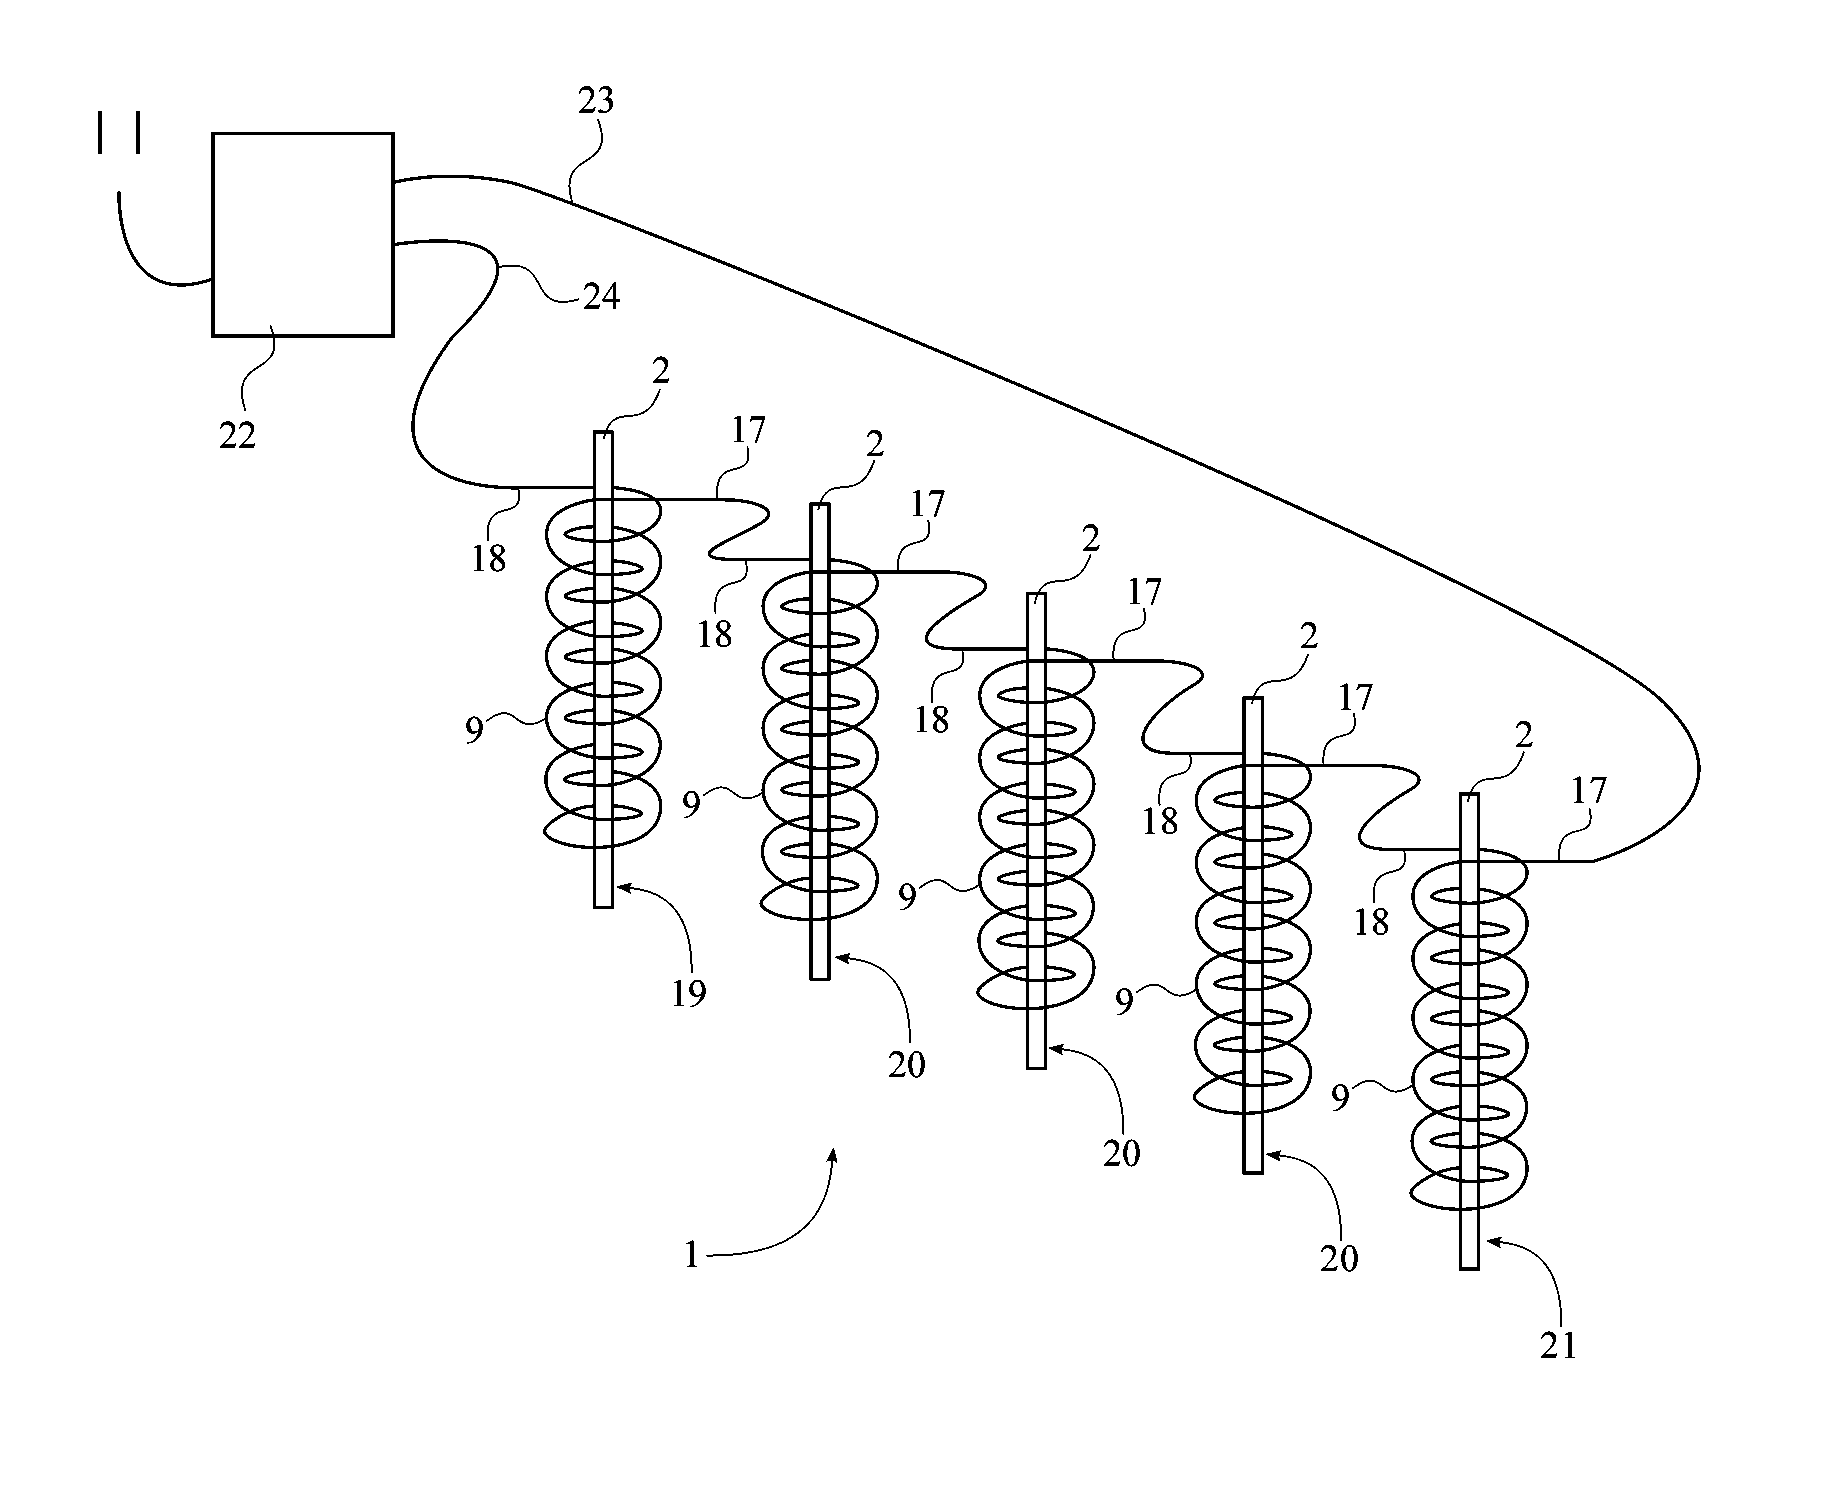 Apparatus for Creating a Vortex System that Intensifies the Multiple Vibrational Magnetic High Frequency Fields